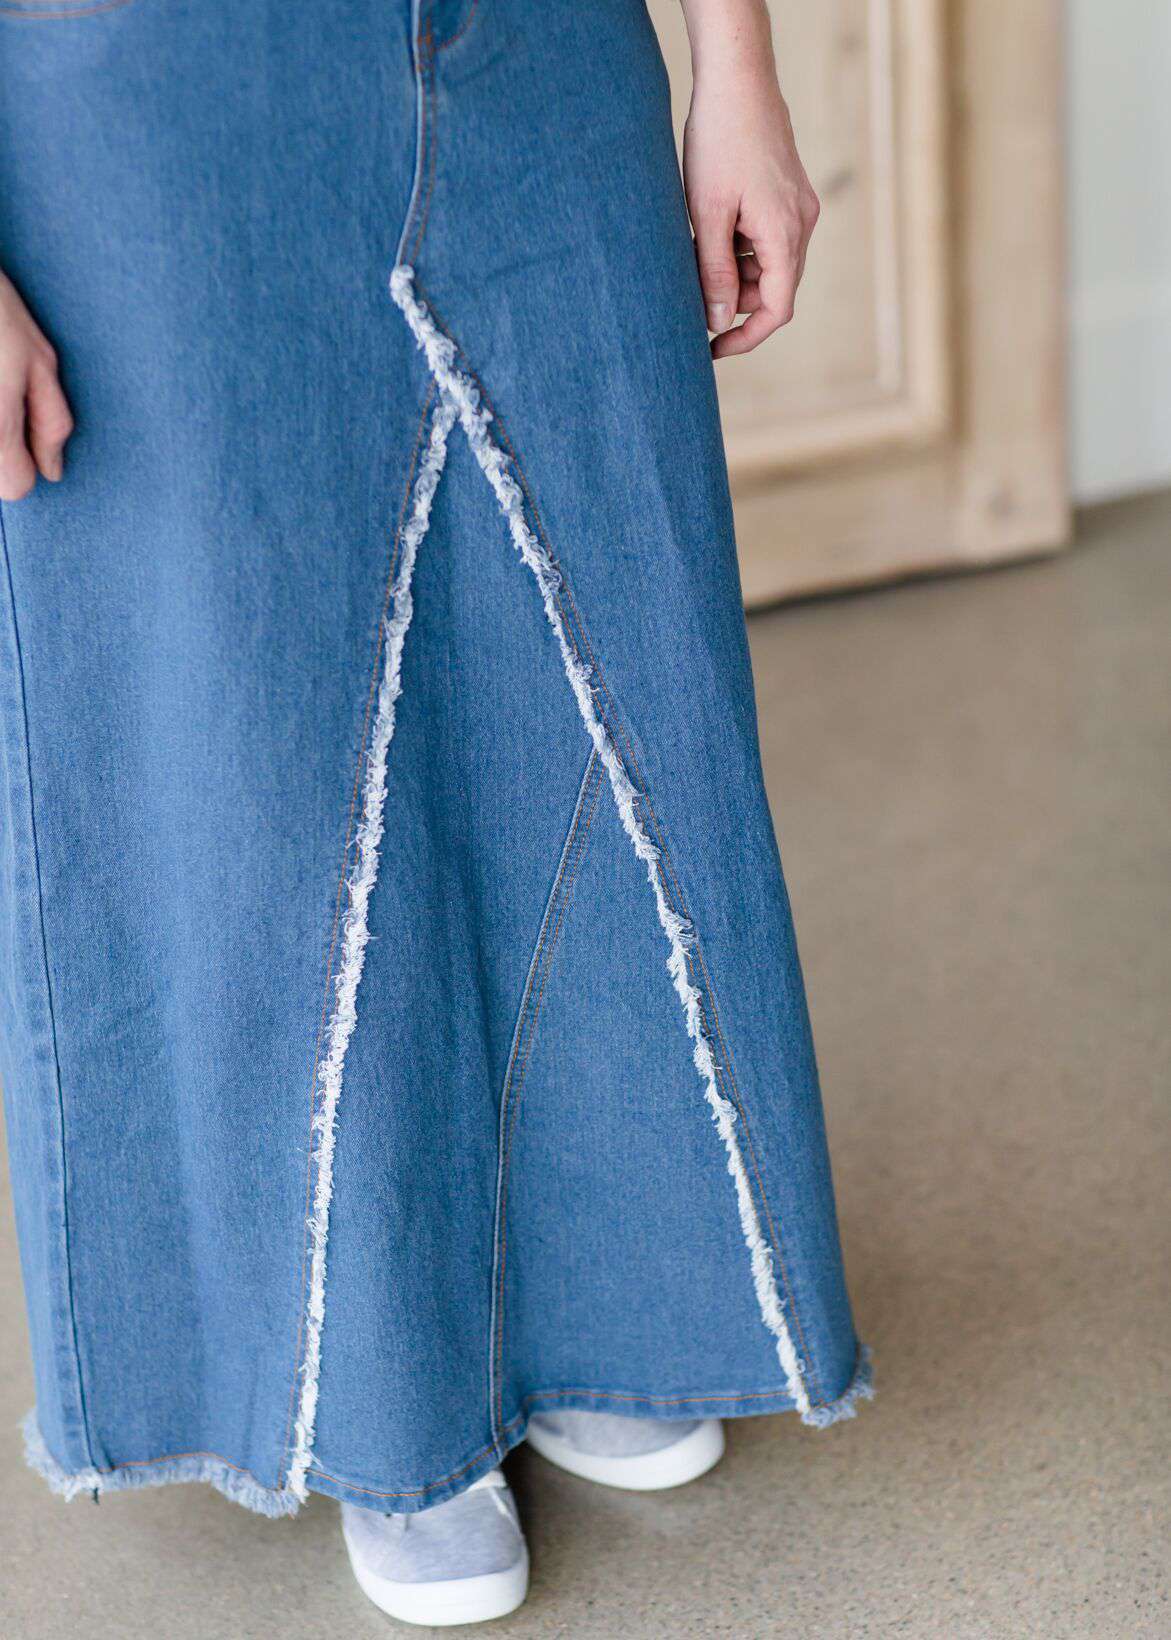 woman wearing an a-line modest long denim skirt with fringe detail and no slit